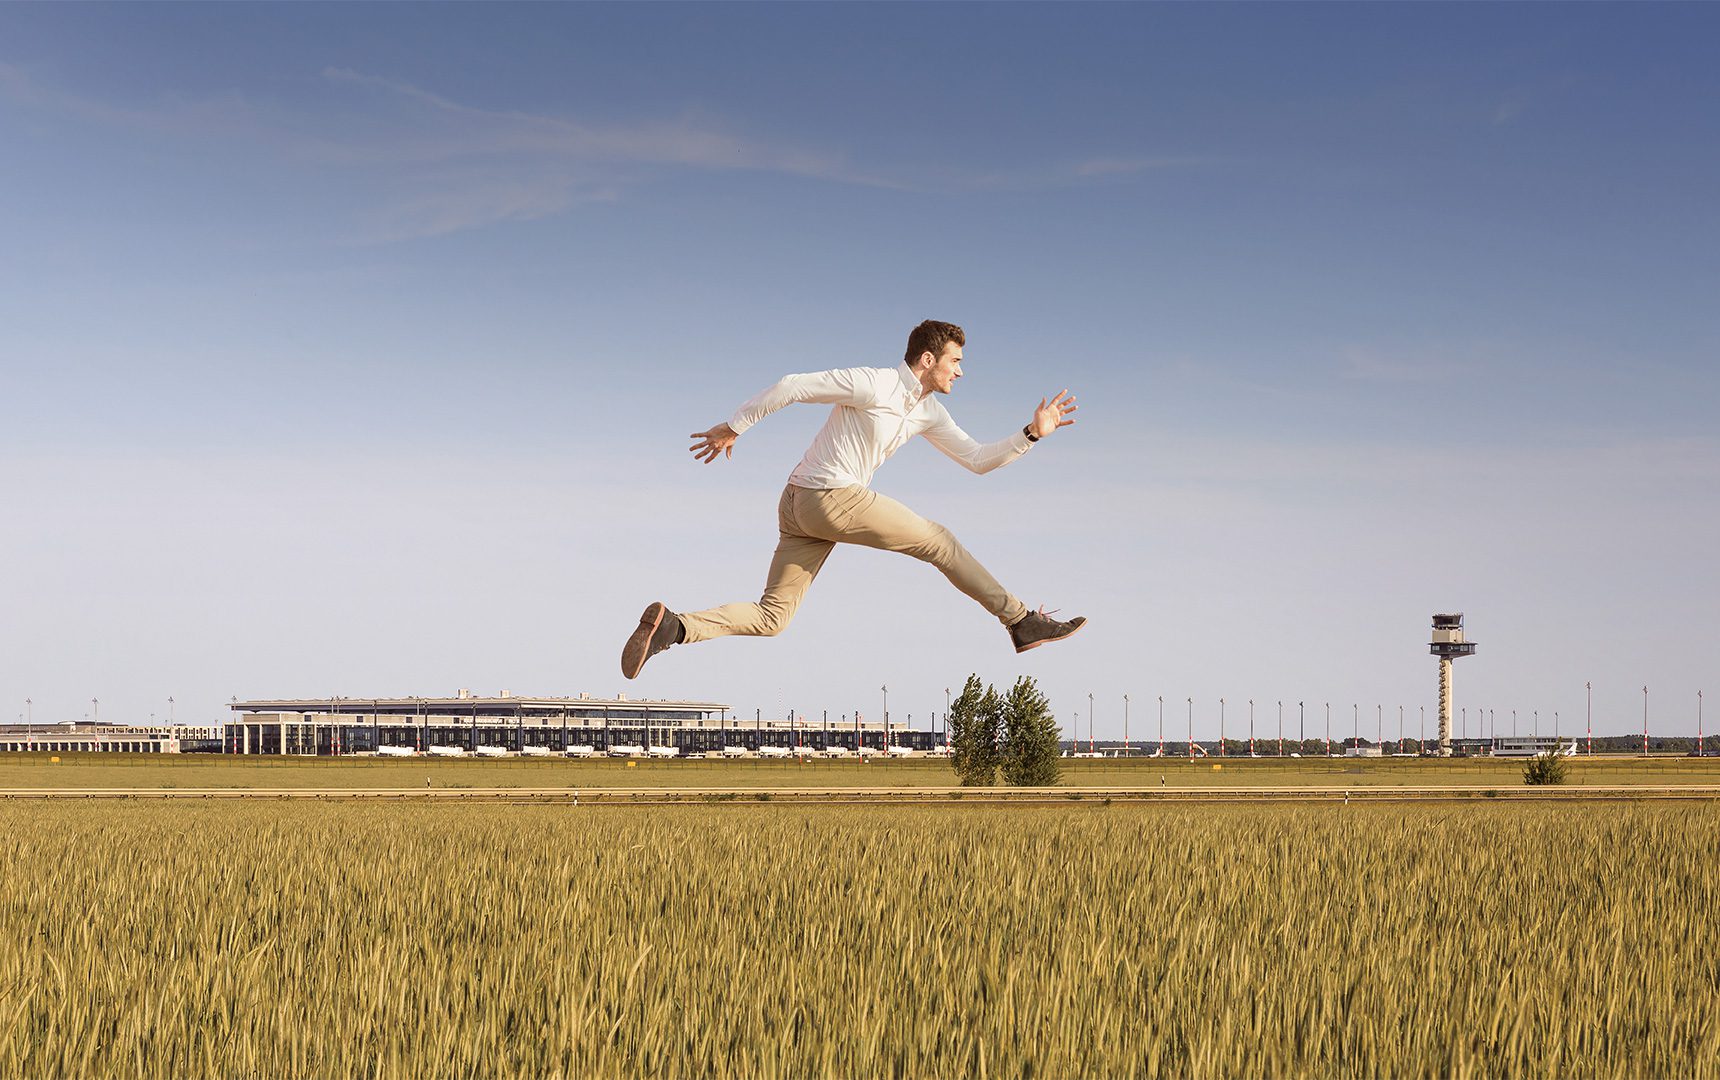 Man leaping over field with airport in the background